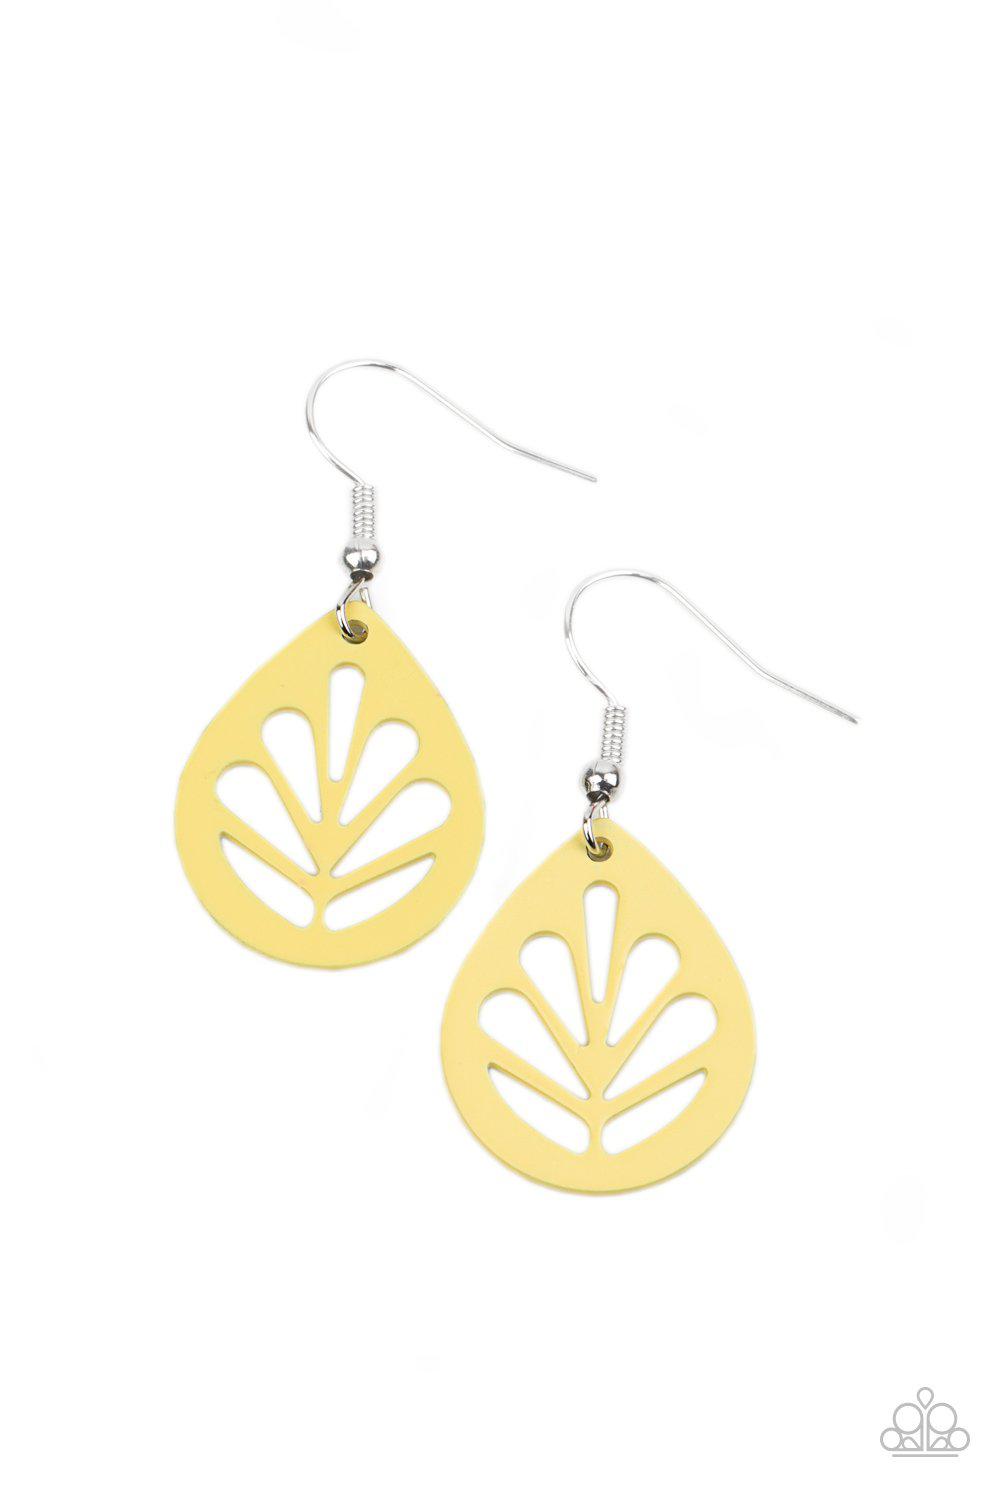 LEAF Yourself Wide Open Yellow Earrings - Paparazzi Accessories- lightbox - CarasShop.com - $5 Jewelry by Cara Jewels